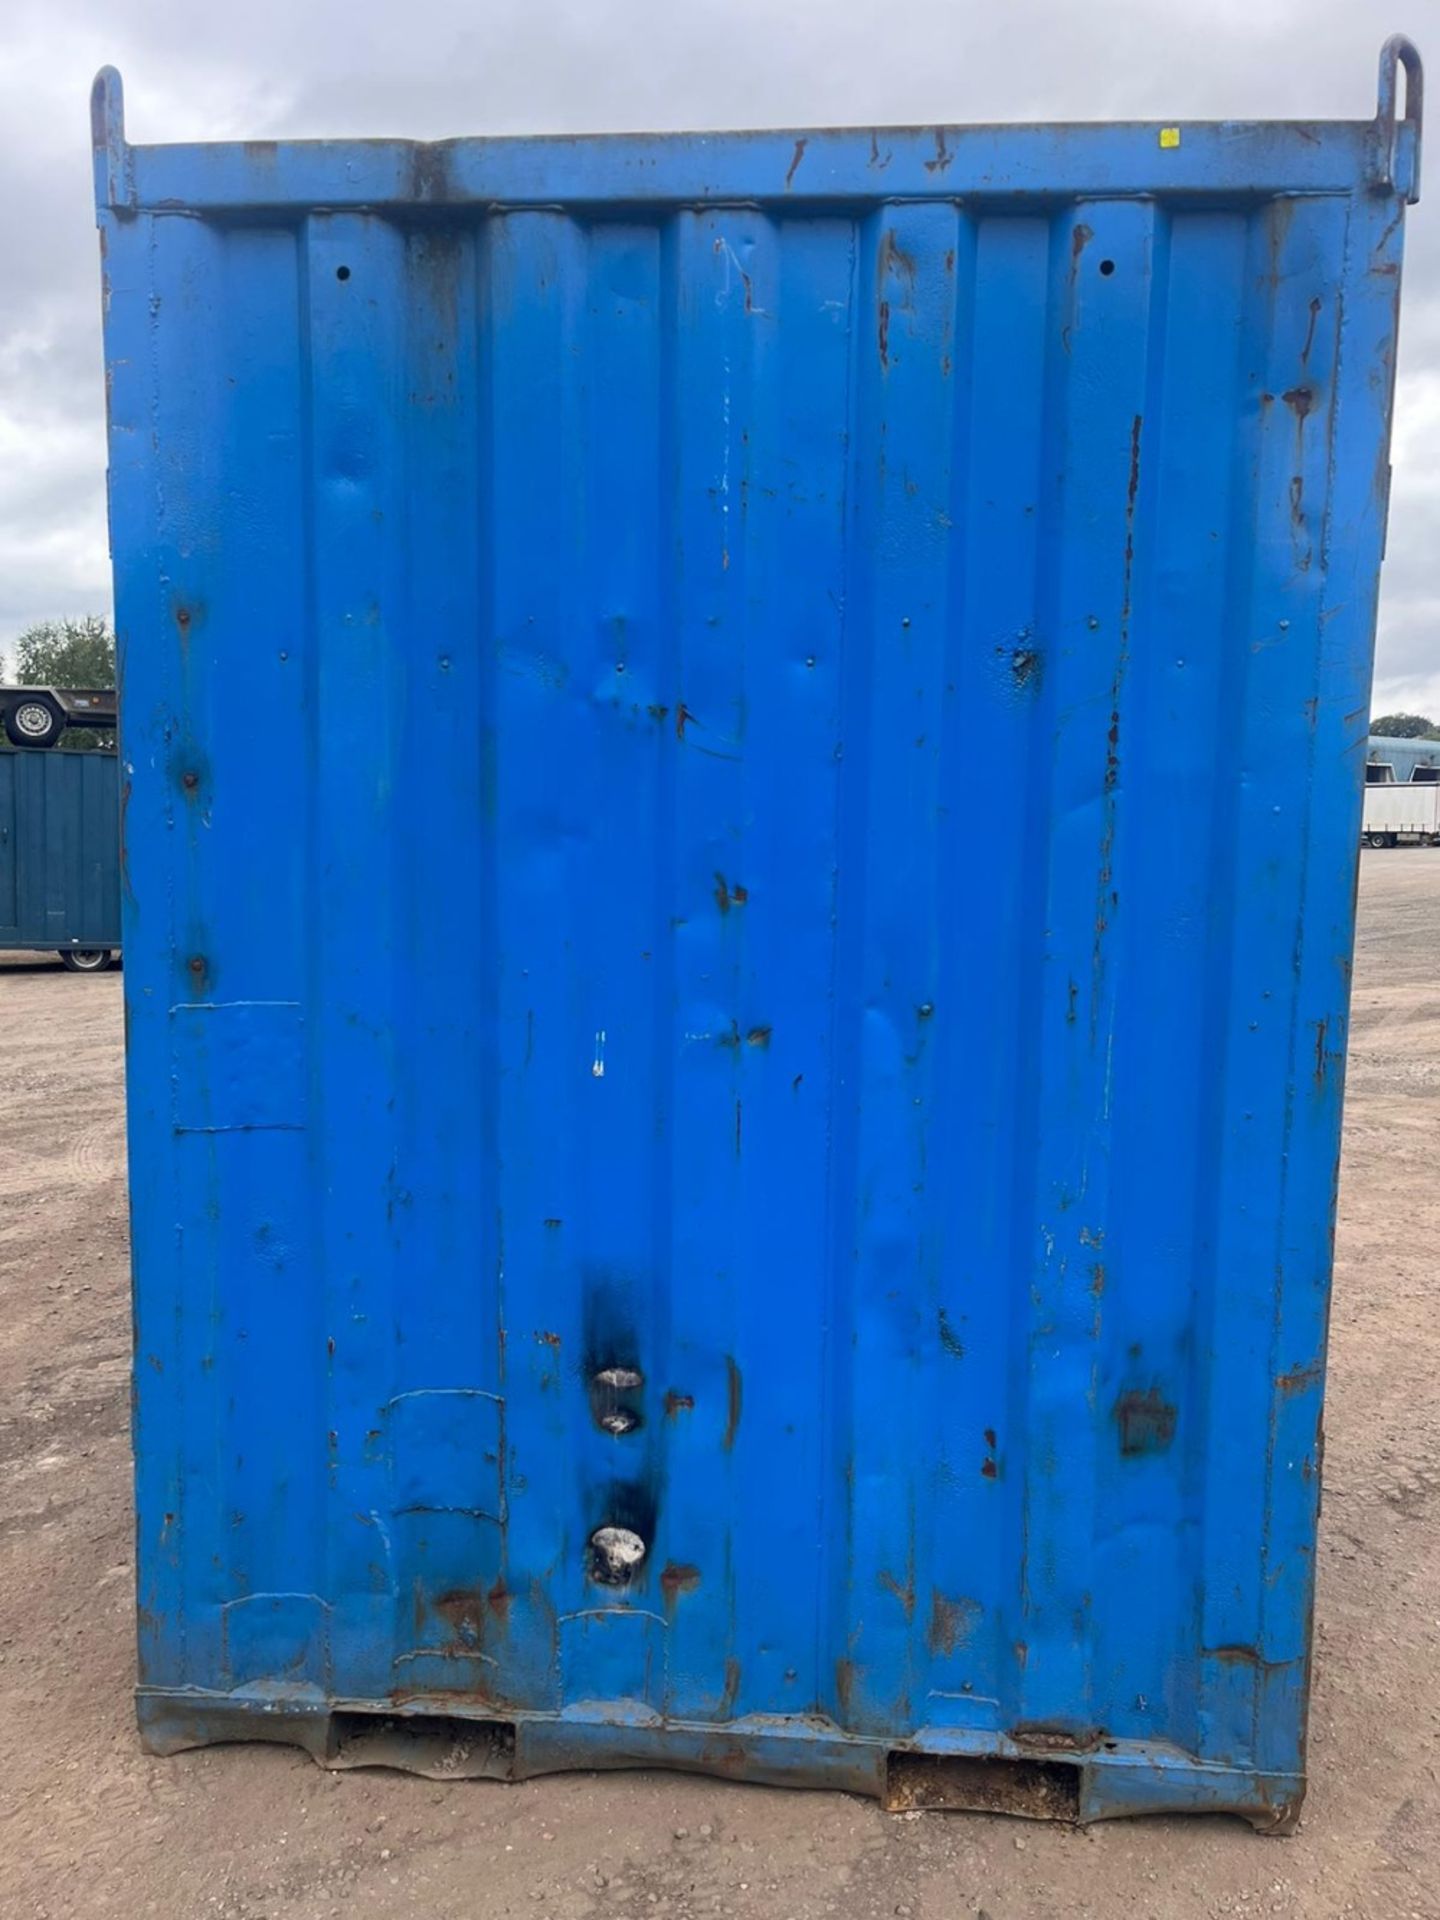 SECURE LOCKABLE STEEL VAULT CONTAINER 1.9X1.68 X2.6 METRES HIGH - Image 3 of 6